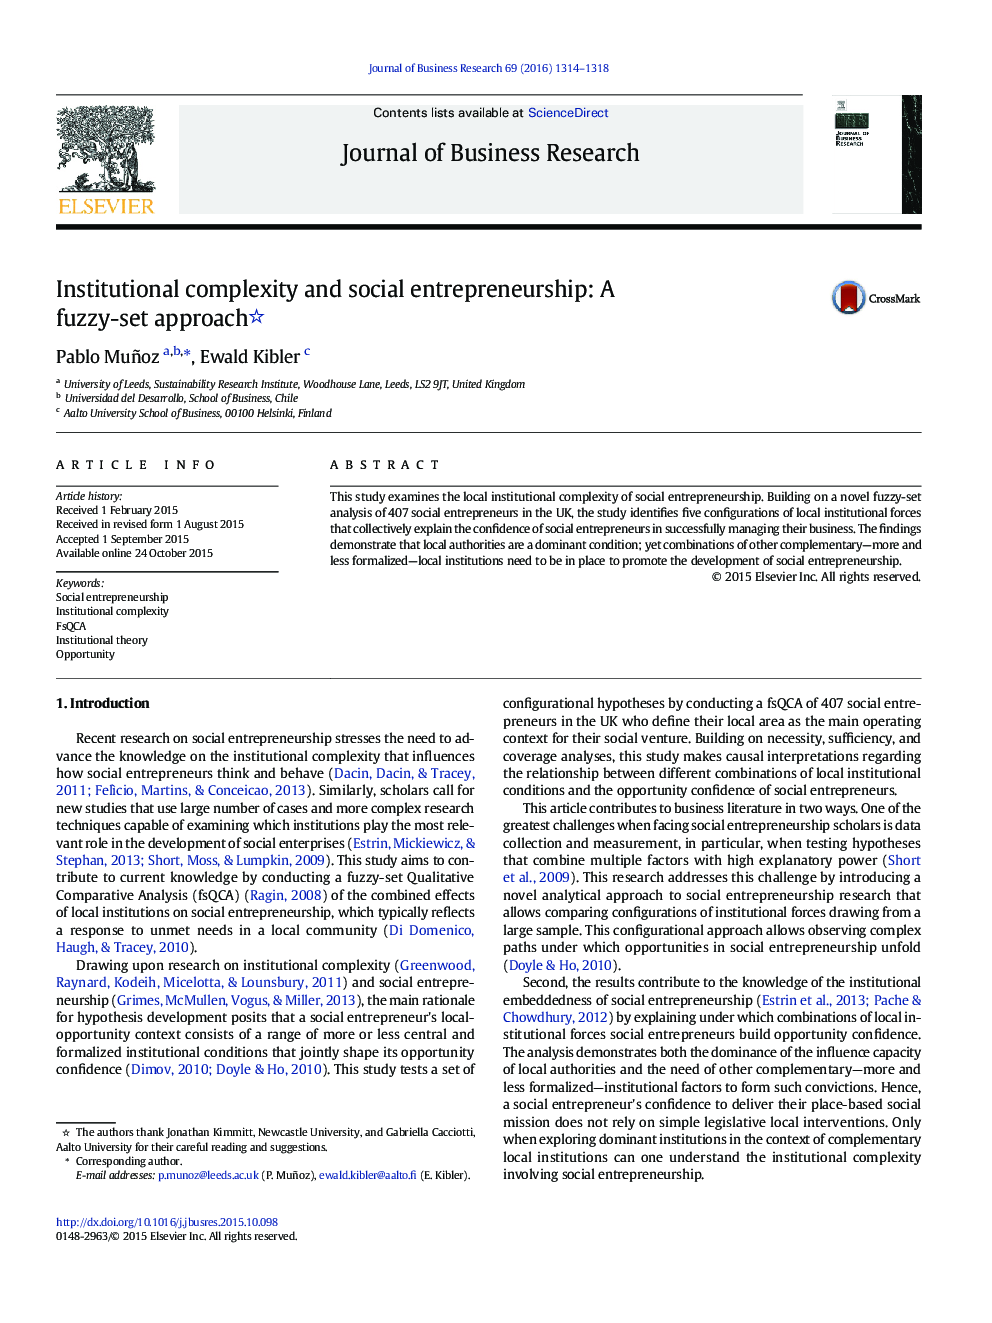 Institutional complexity and social entrepreneurship: A fuzzy-set approach